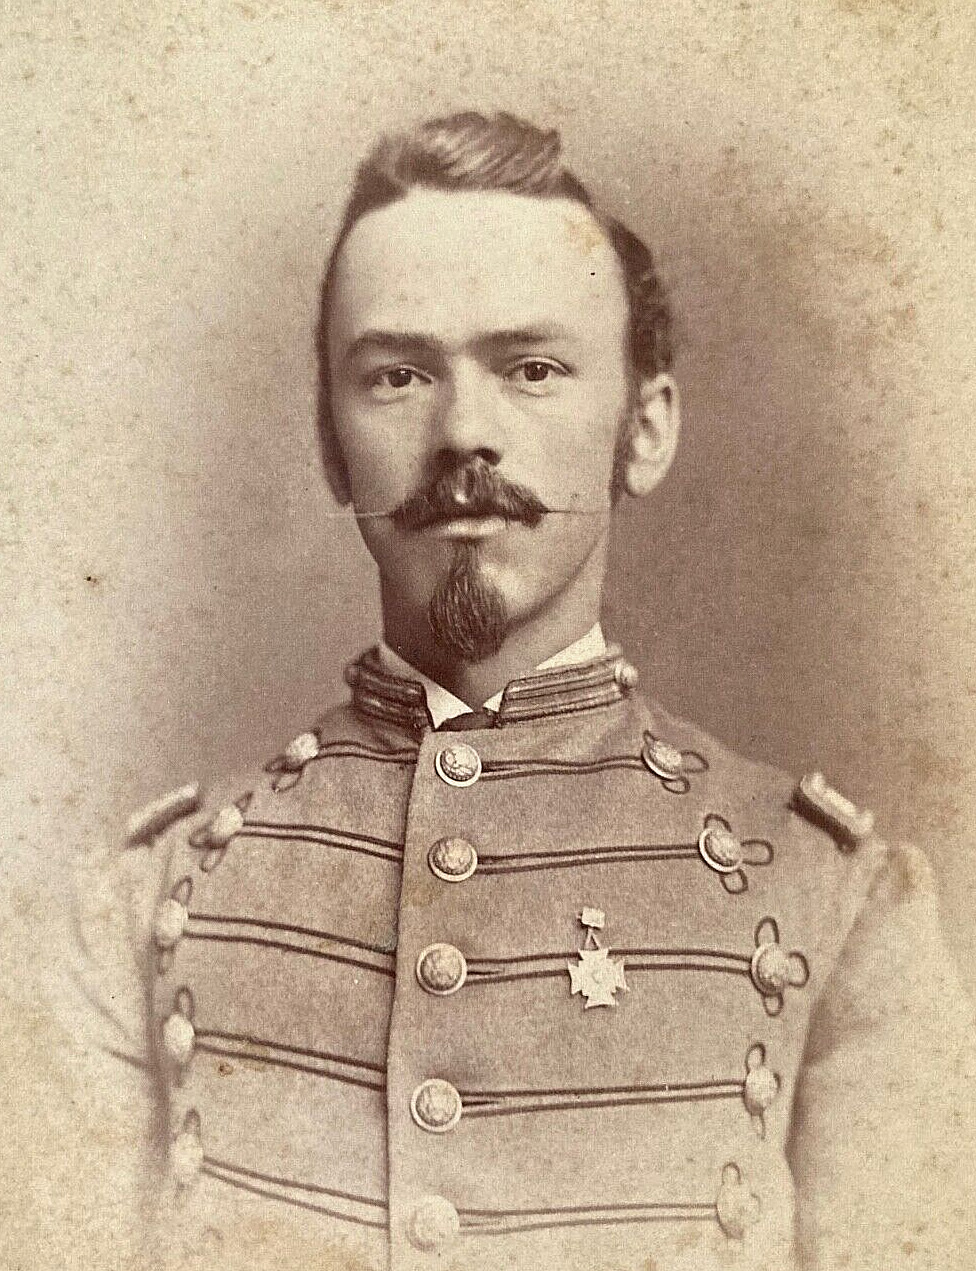 RARE CIVIL WAR UNION ARMY OFFICER WEARS HIS CADET COAT 1865 CABINET CARD PHOTO